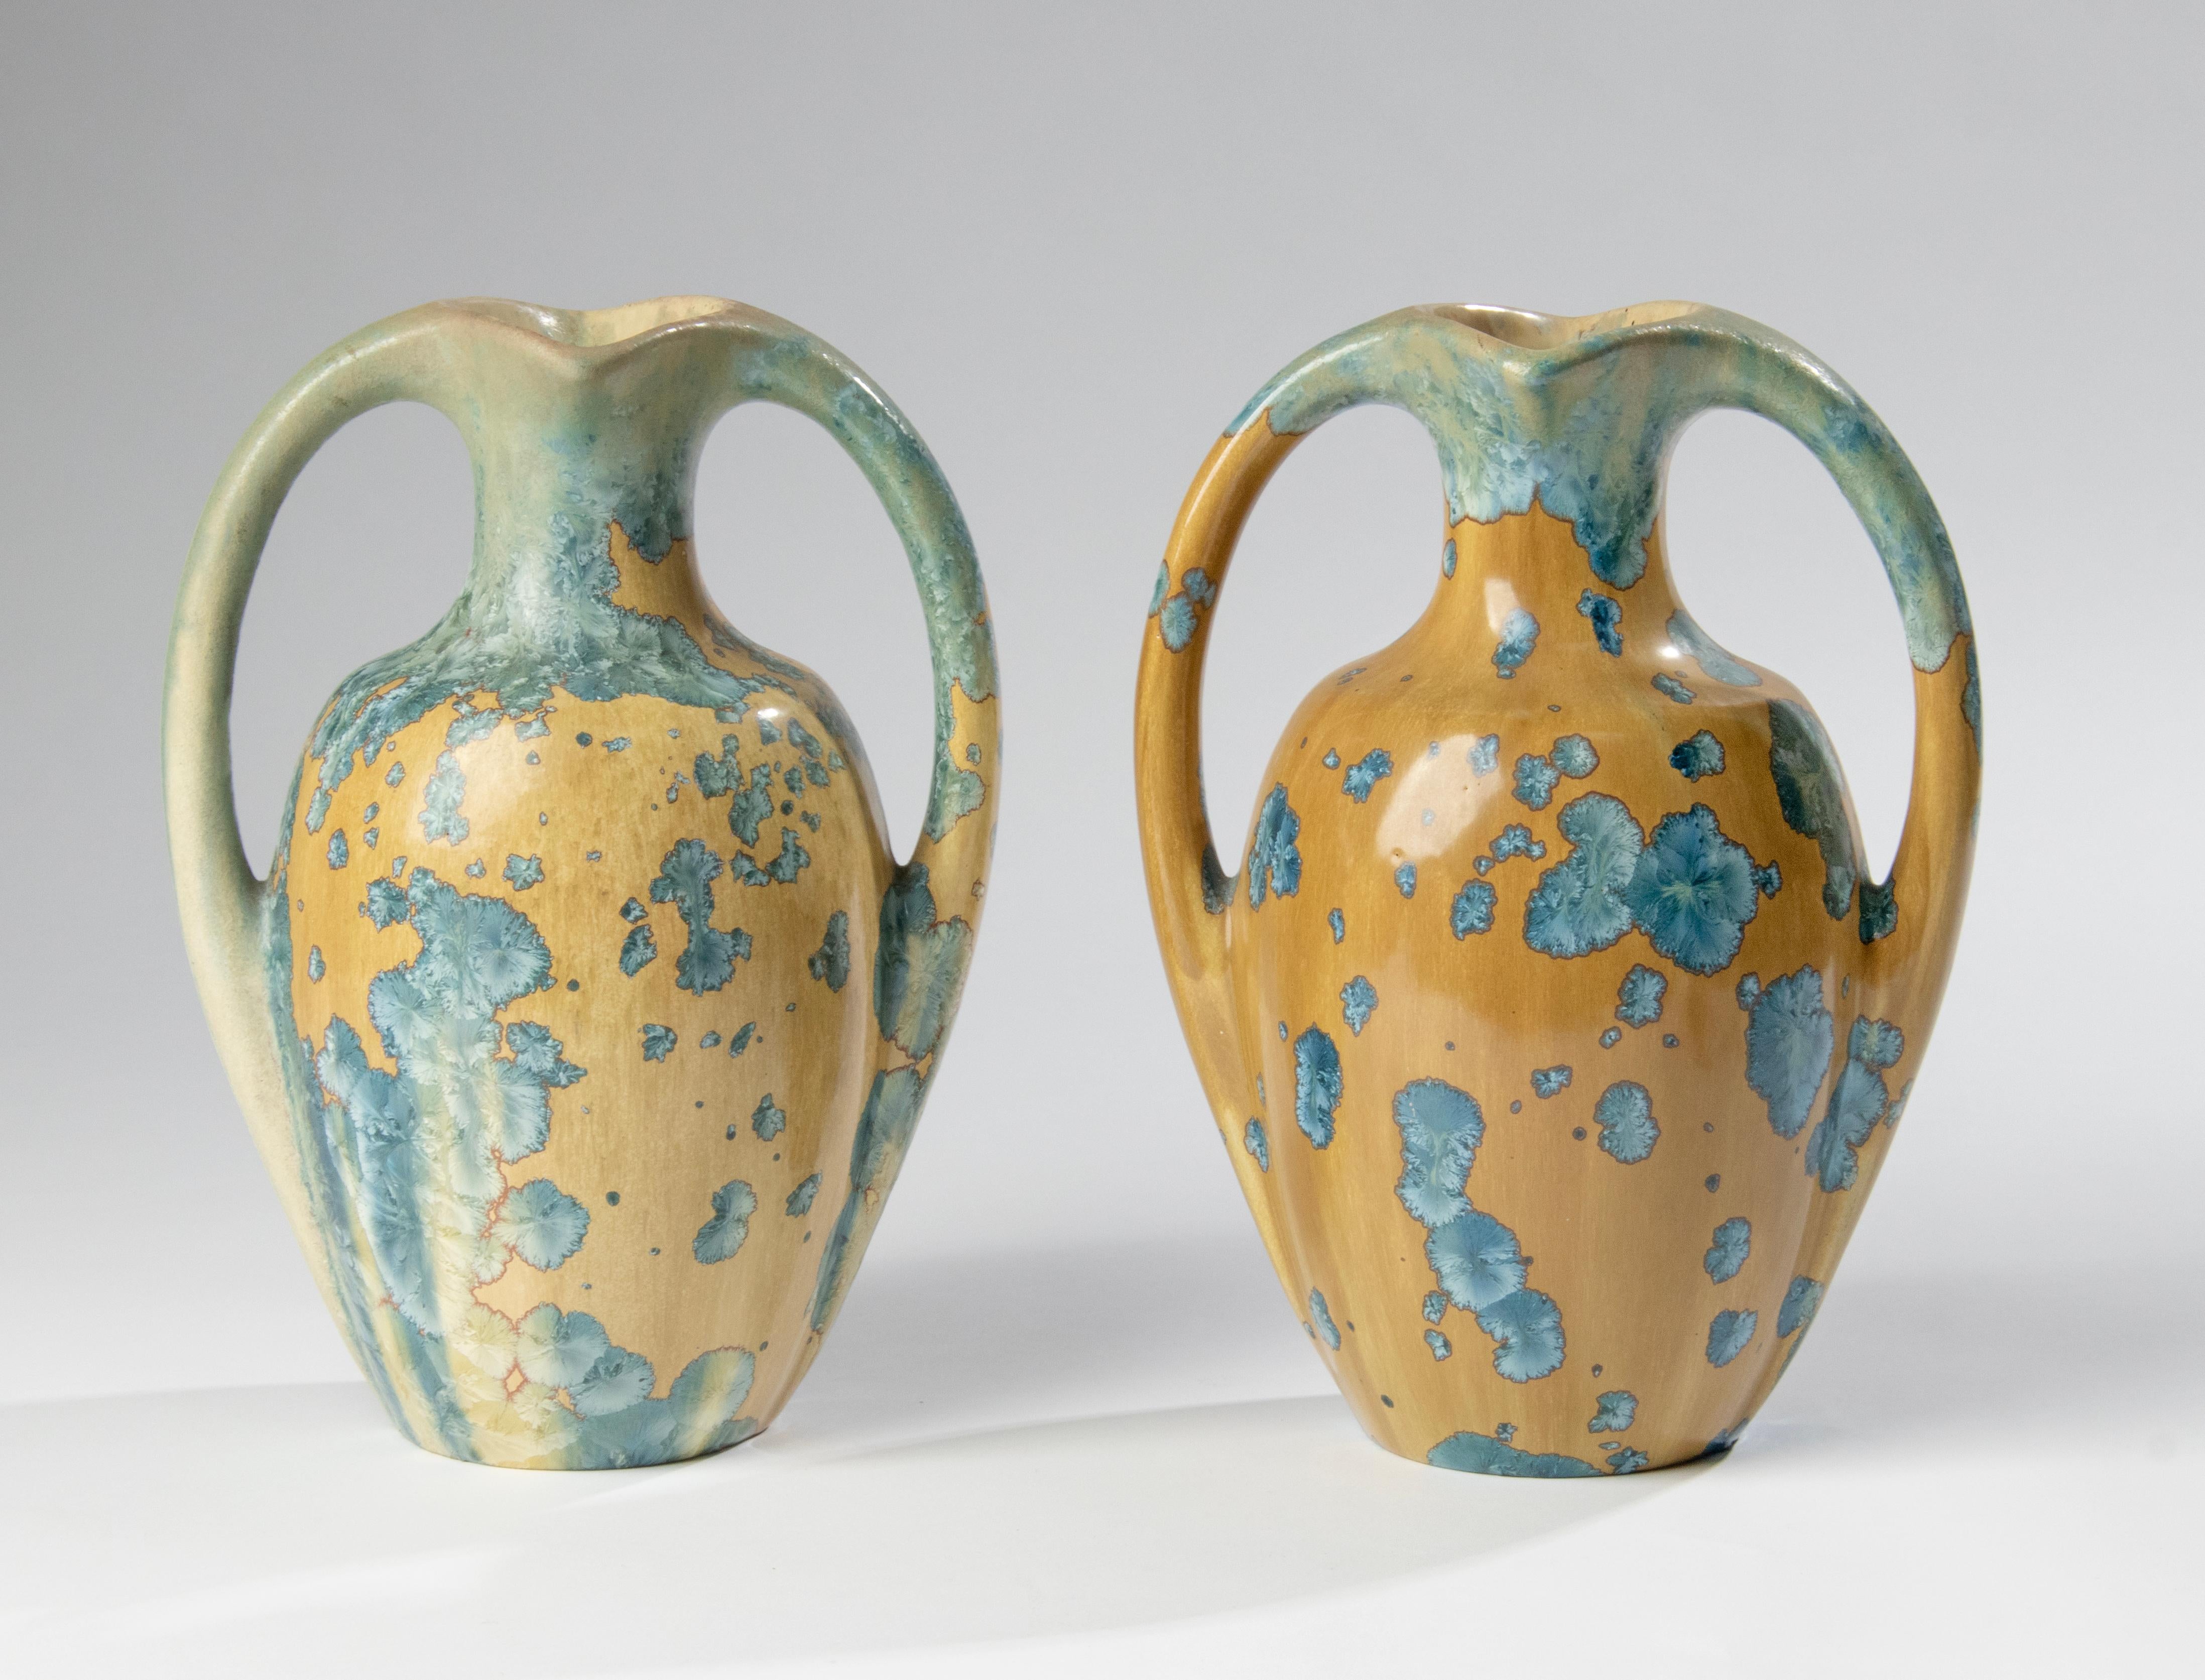 A nice pair of two ceramic Art Deco vases from La Faïencerie Héraldique de Pierrefonds Pottery of France. The vases are designed with two curved handles and decorated in a golden brown glaze with bright blue crystalline clusters scattered around the